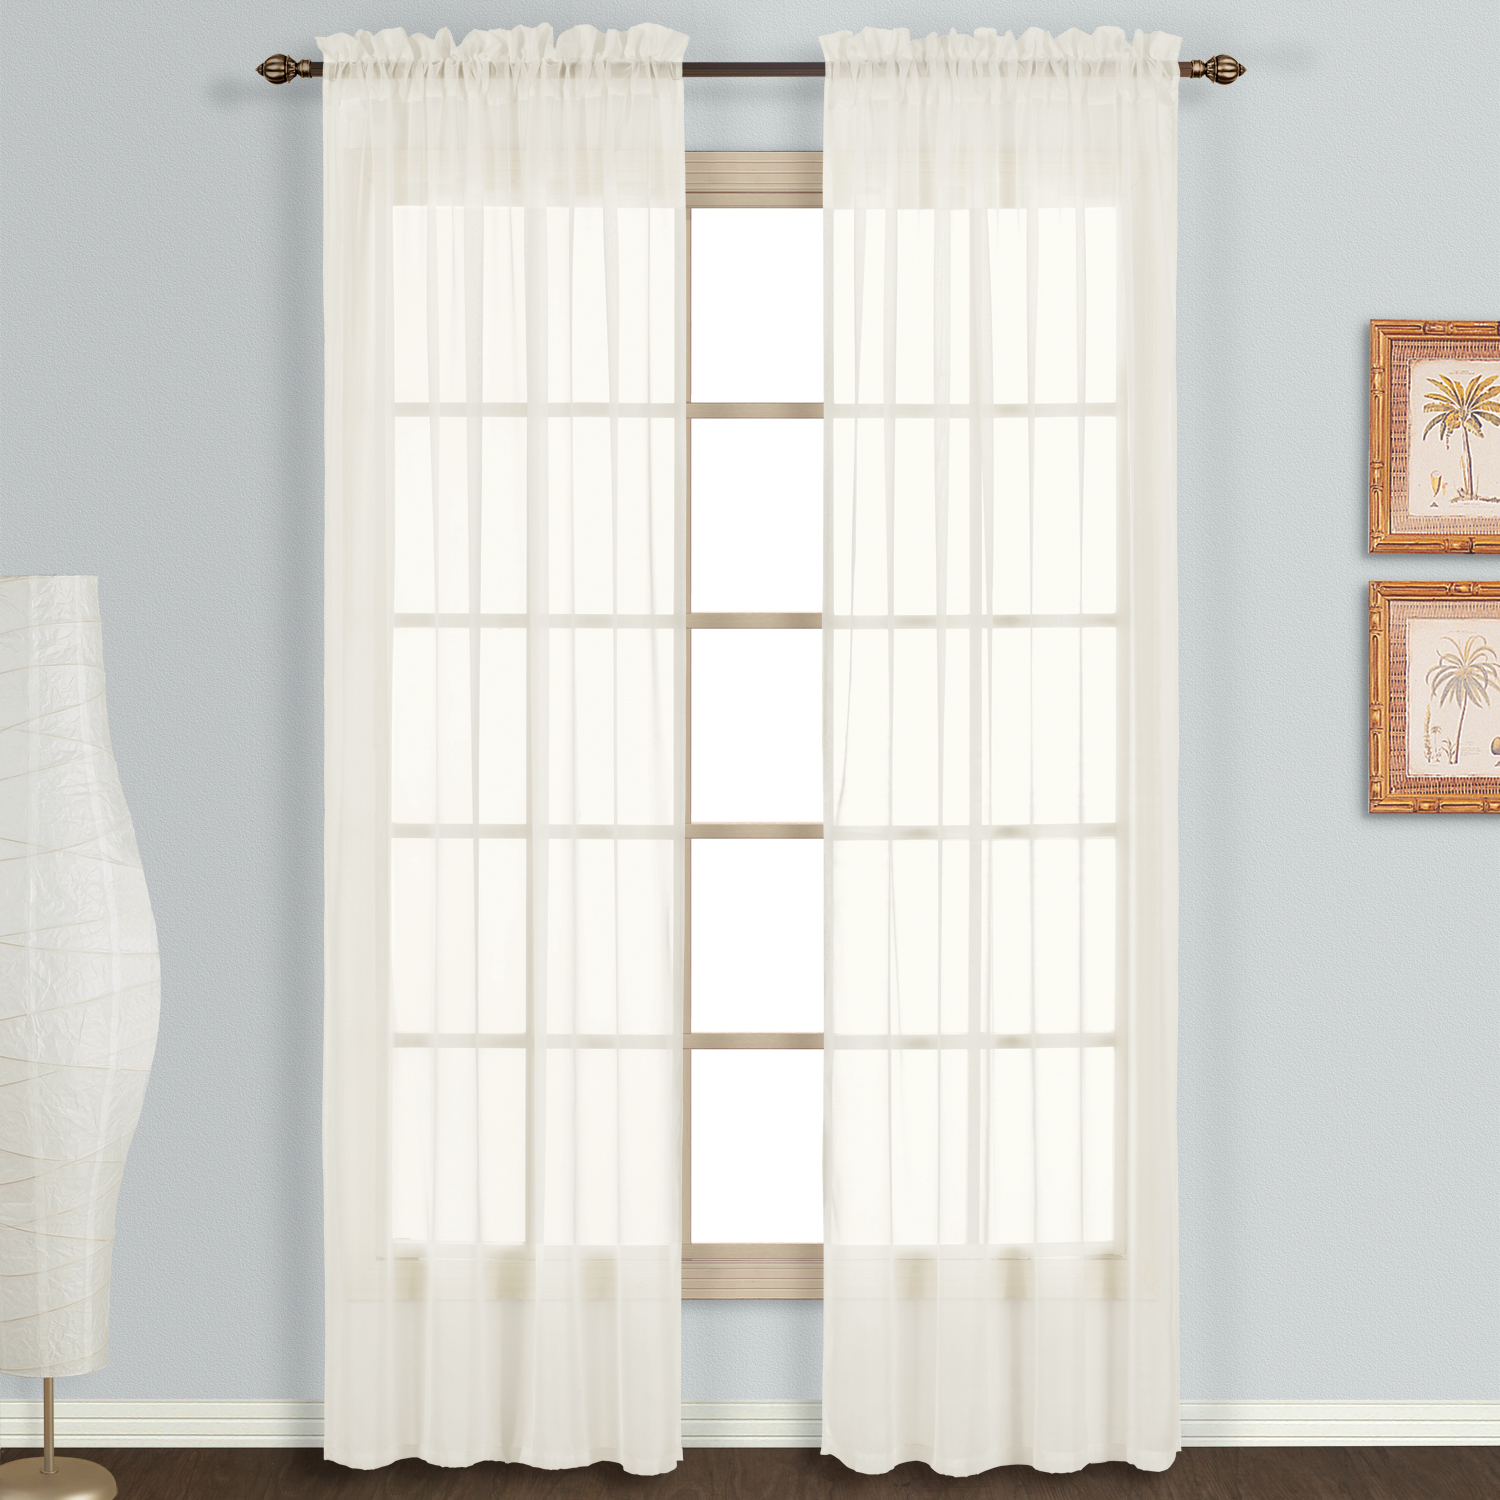 United Curtain Company Monte Carlo 118" x 95" voile window panel pair